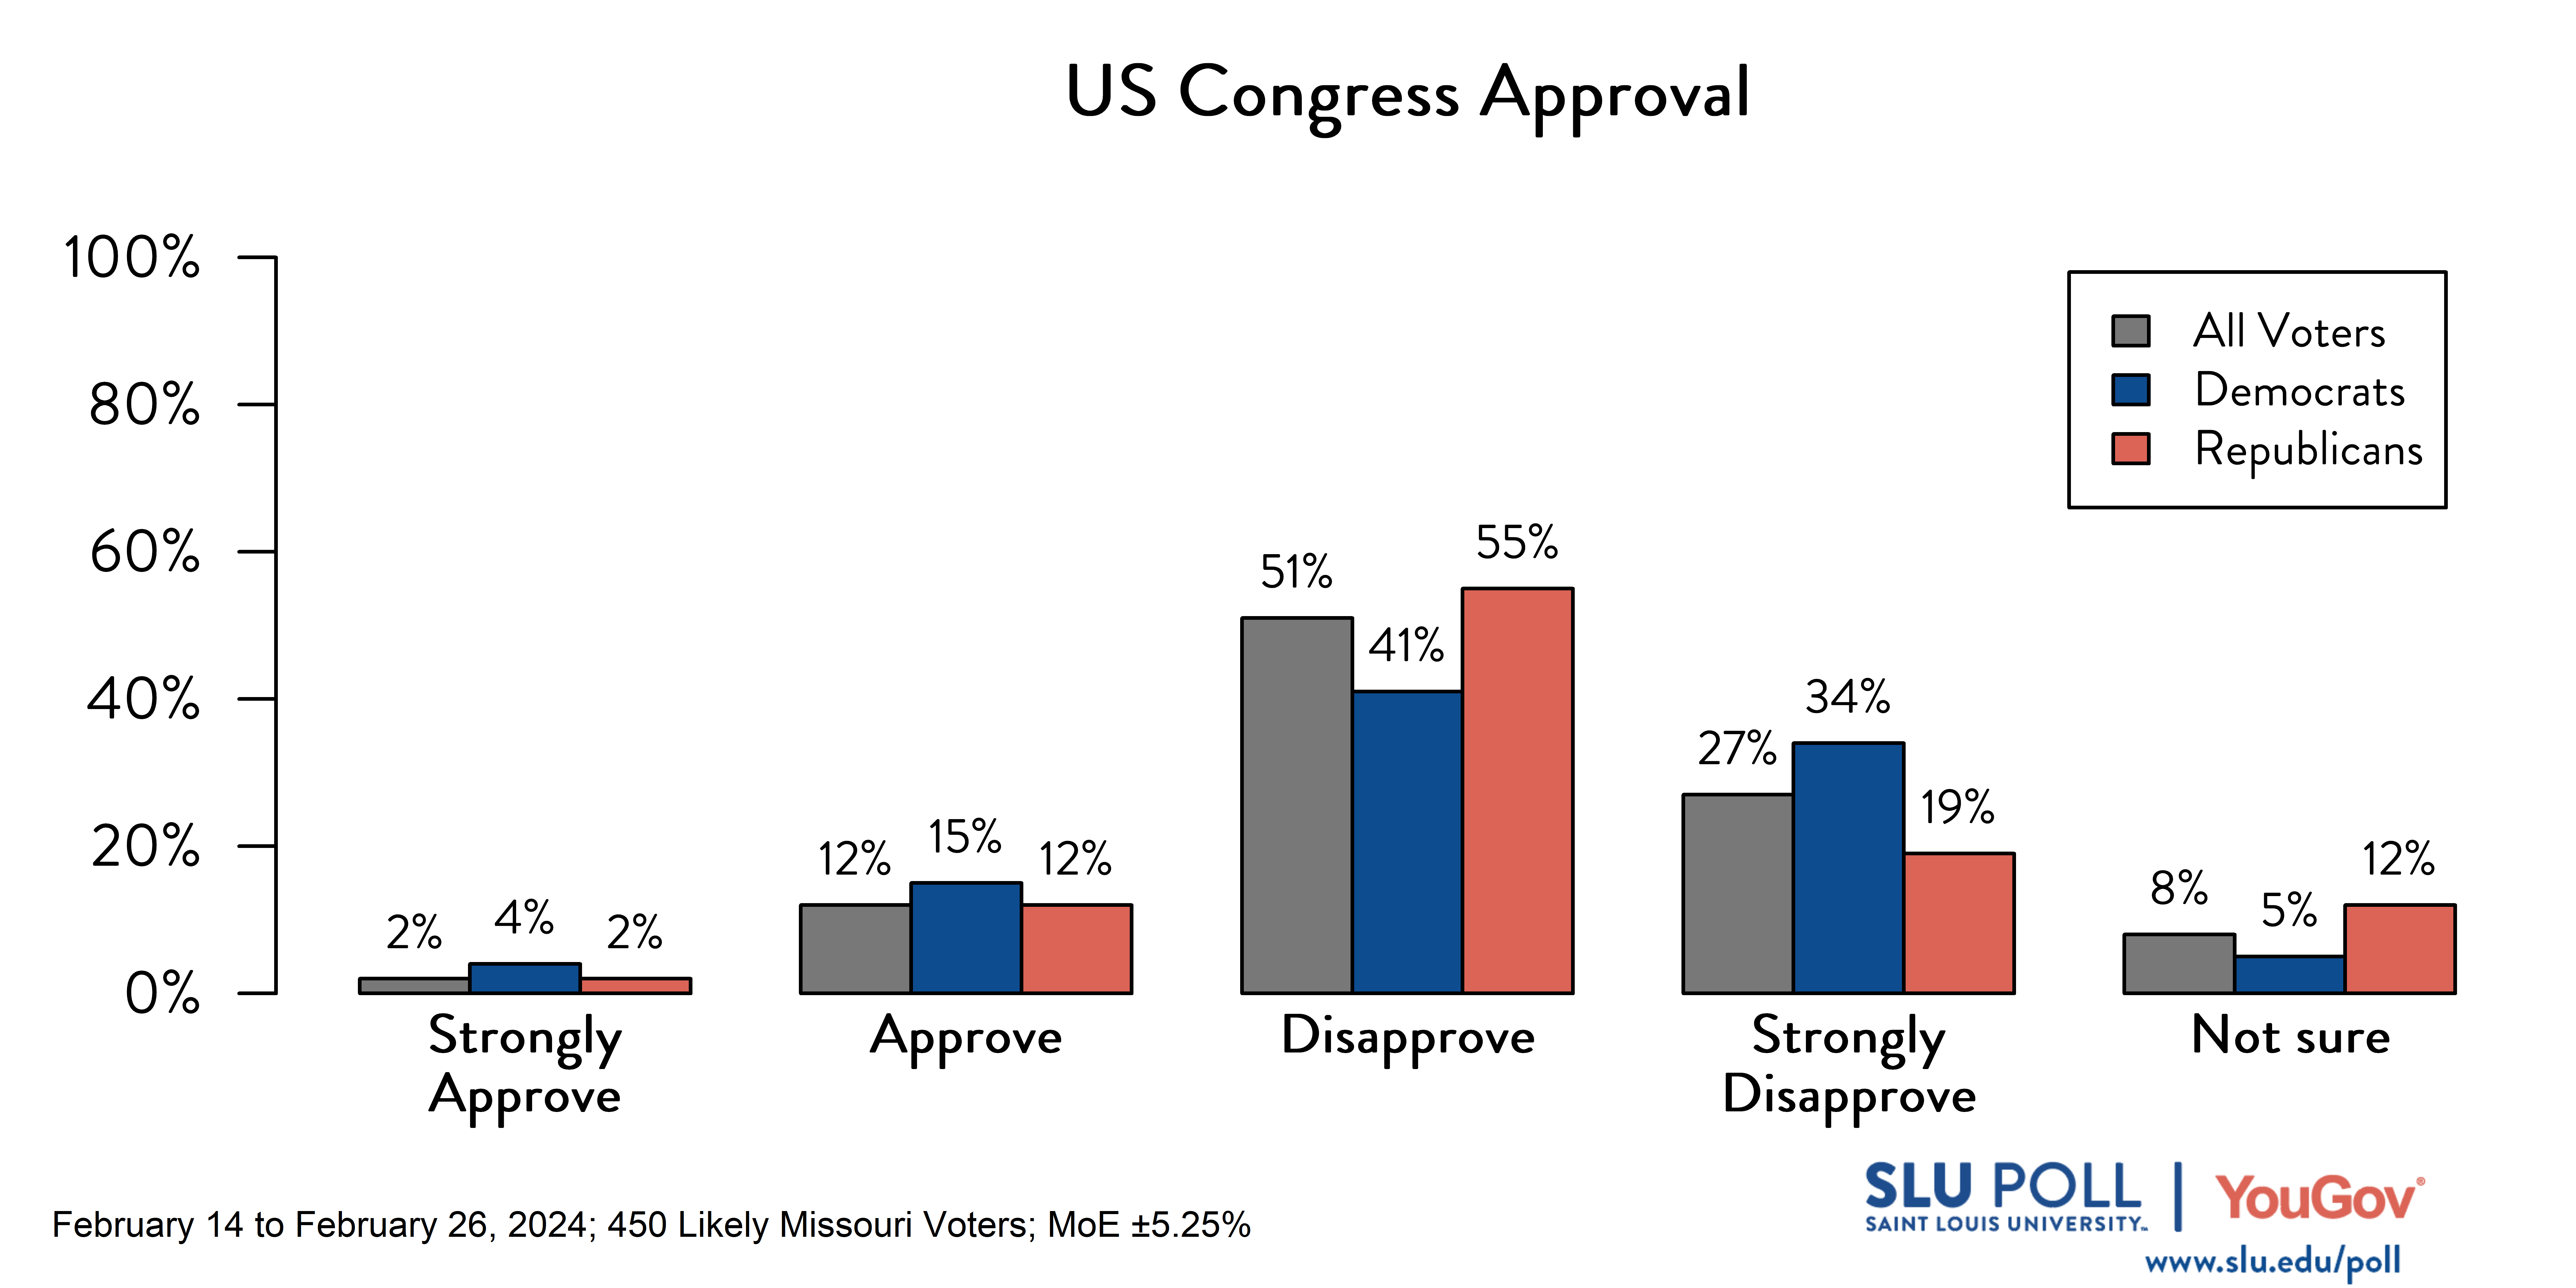 Likely voters' responses to 'Do you approve or disapprove of the way each is doing their job…The US Congress?': 2% Strongly approve, 12% Approve, 51% Disapprove, 27% Strongly disapprove, and 8% Not sure. Democratic voters' responses: ' 4% Strongly approve, 15% Approve, 41% Disapprove, 34% Strongly disapprove, and 5% Not sure. Republican voters' responses:  2% Strongly approve, 12% Approve, 55% Disapprove, 19% Strongly disapprove, and 12% Not sure.